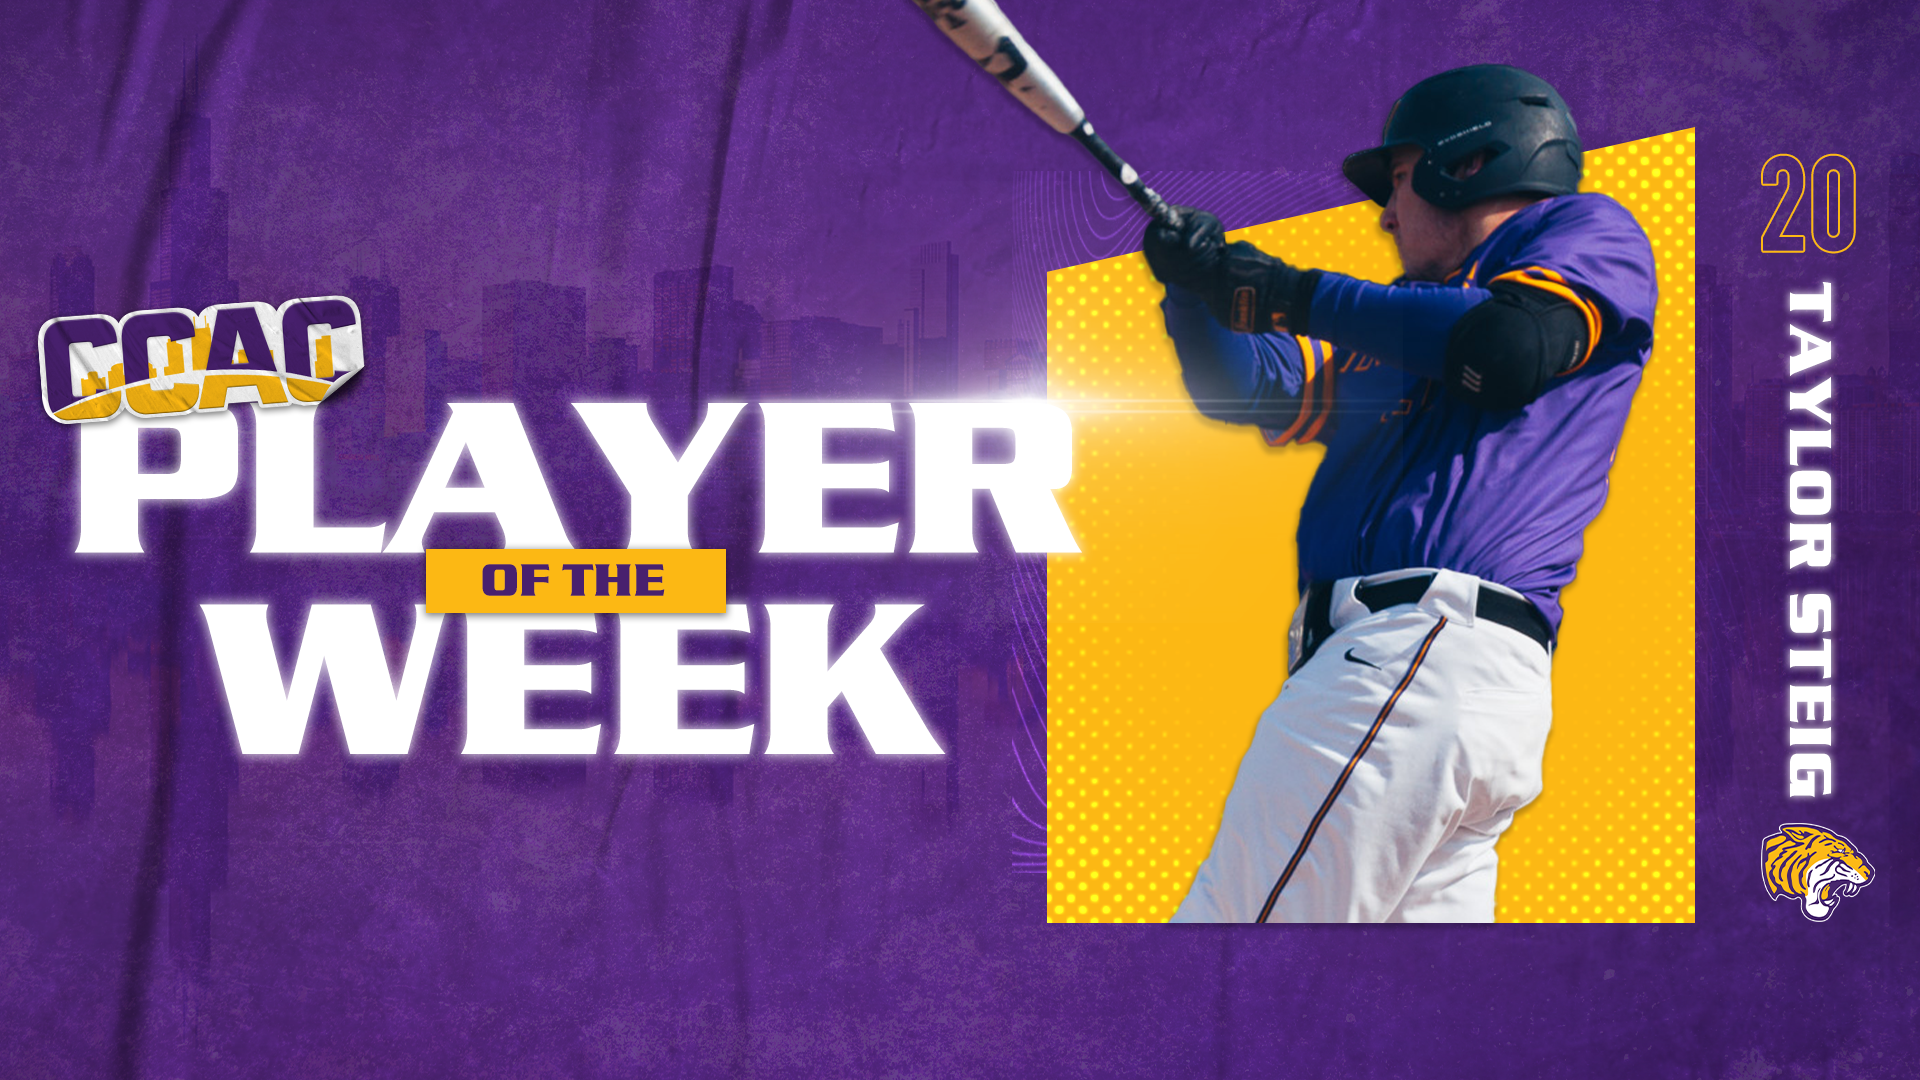 STEIG NOTCHES CCAC BASEBALL PLAYER OF THE WEEK RECOGNITION